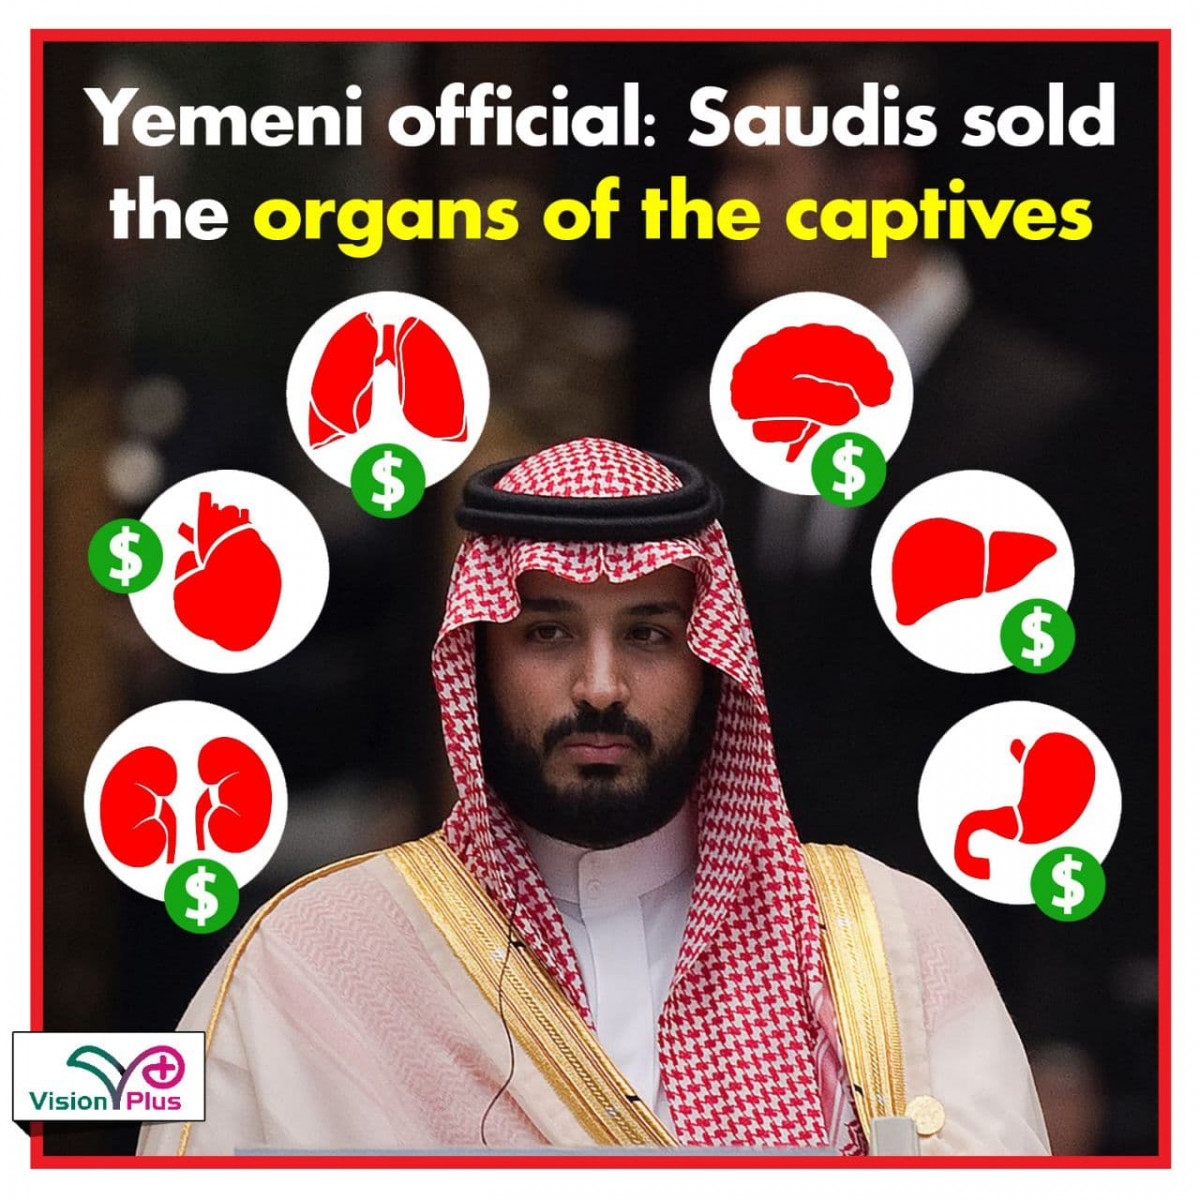 Yemeni official: Saudis sold the organs of the captives